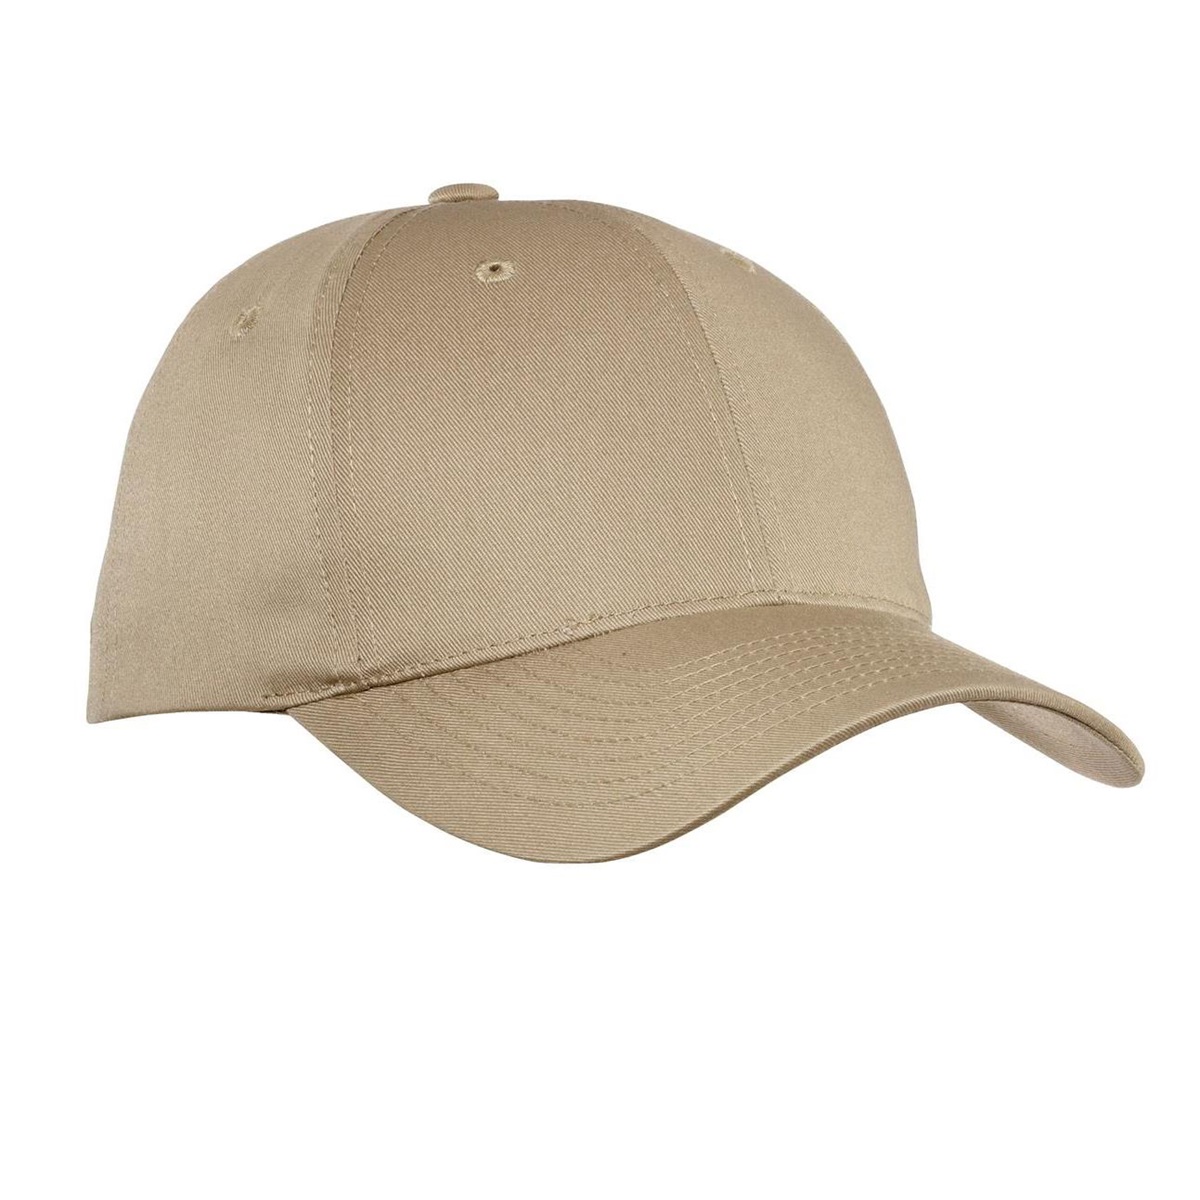 Port Authority C929 Unstructured Camouflage Mesh Back Cap - Mossy Oak Break Up Country/Tan